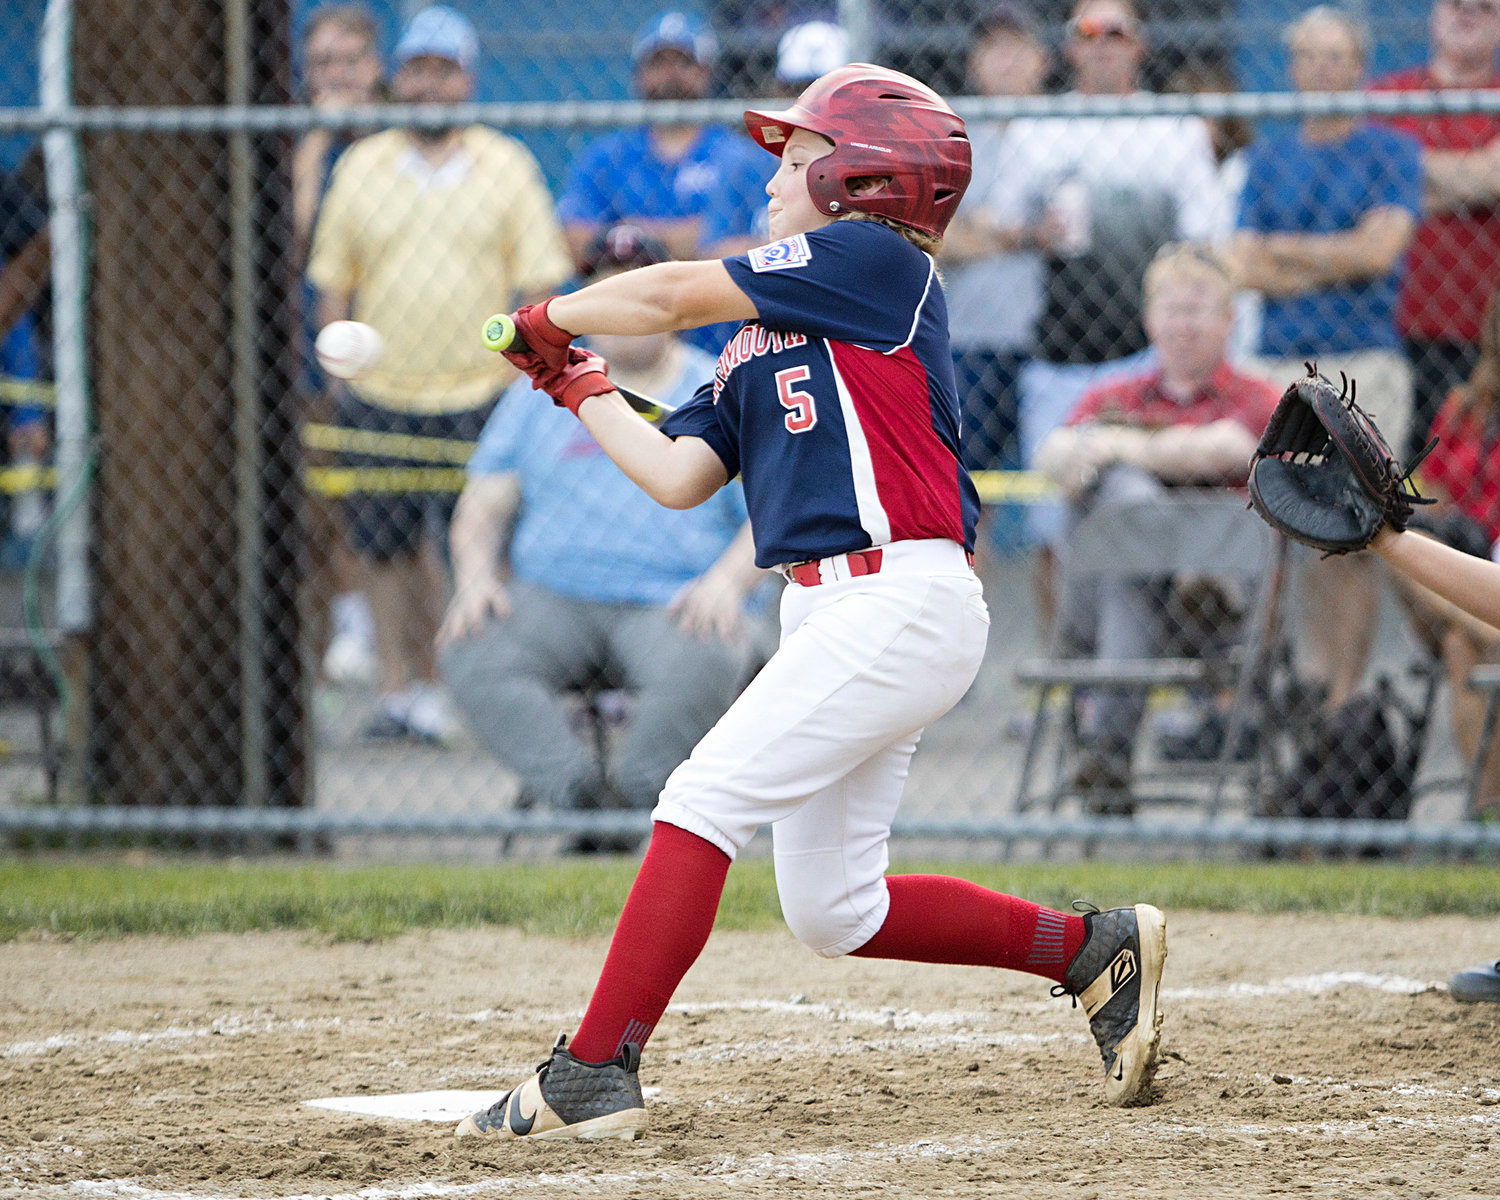 Kane Brule gets his bat on the ball while battling Cumberland in the Little League State Finals, Saturday.